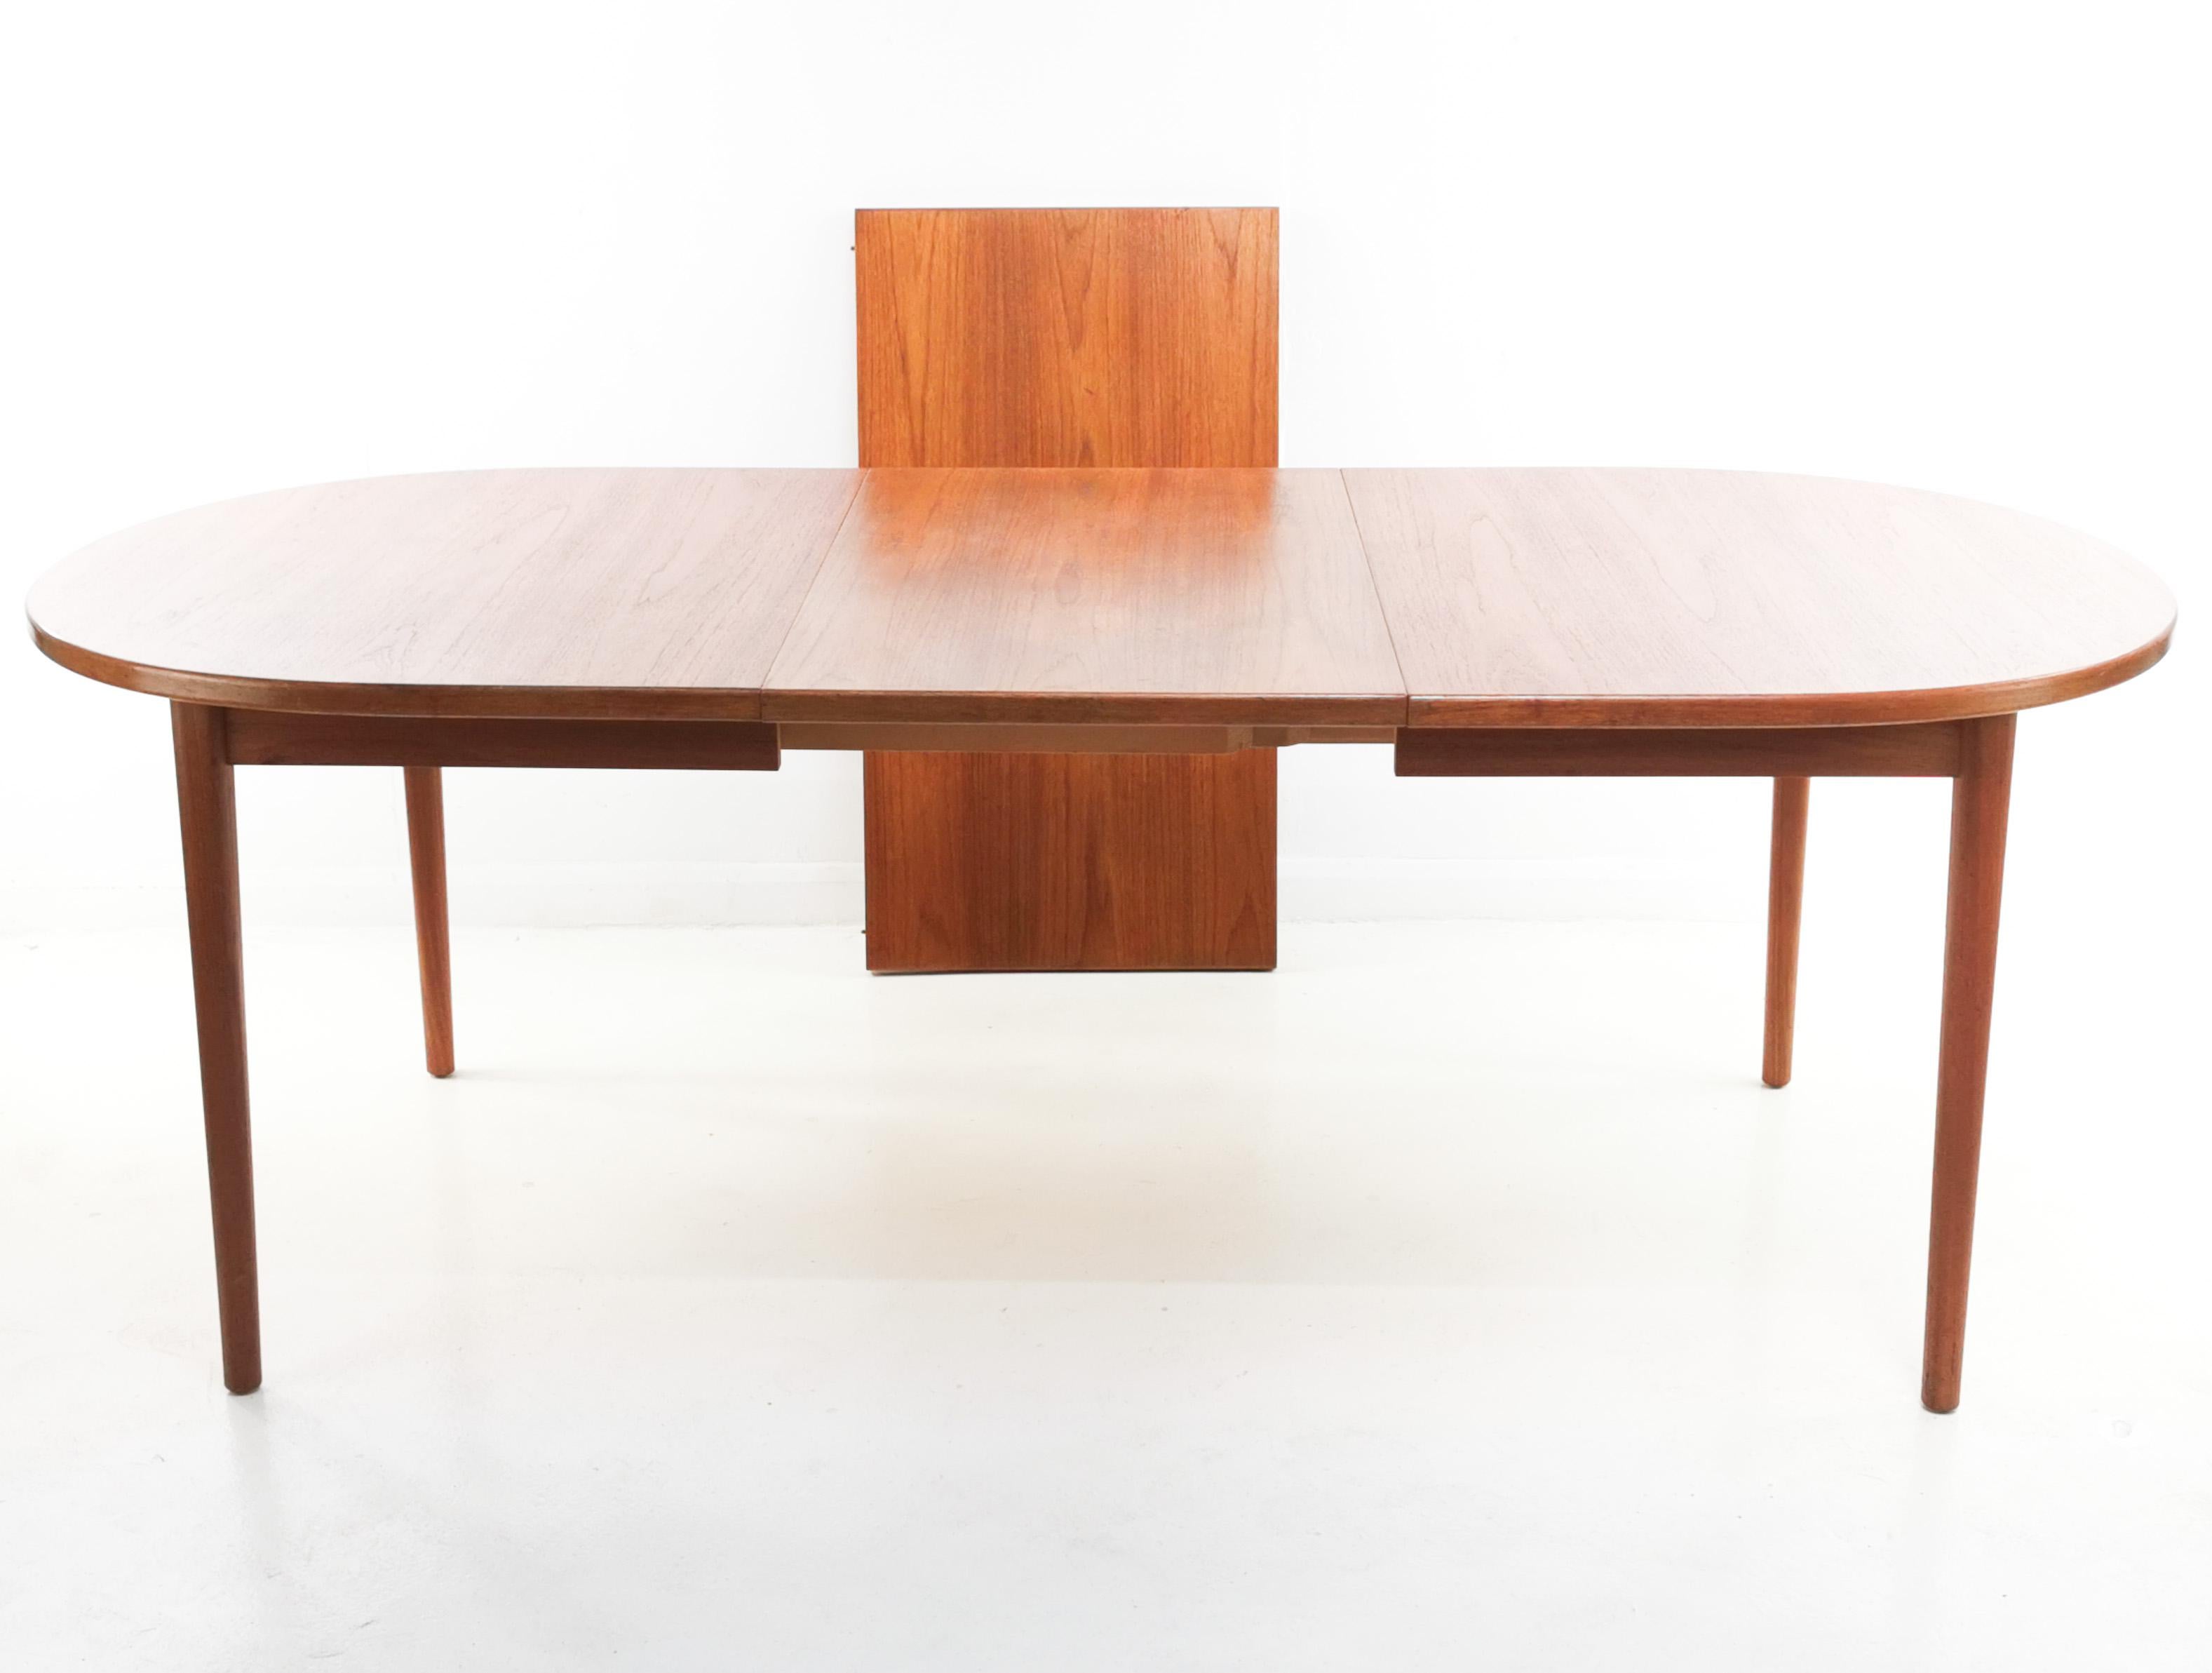 20th Century 1970s Teak Extending Dining Table by Nils Jonsson for Troeds Midcentury